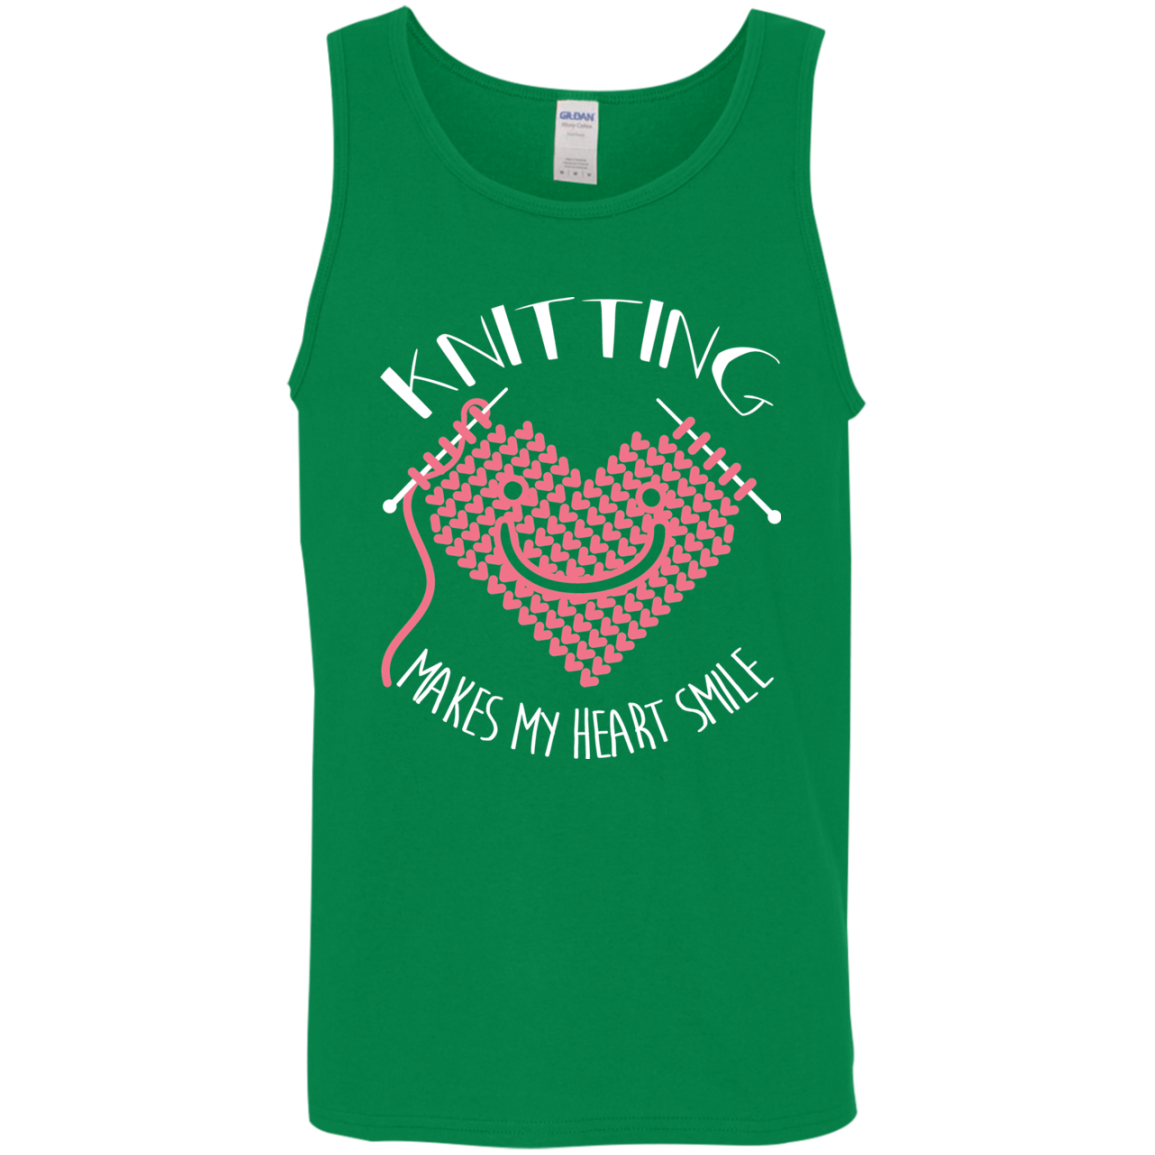 Knitting Makes My Heart Smile Cotton Tank Top